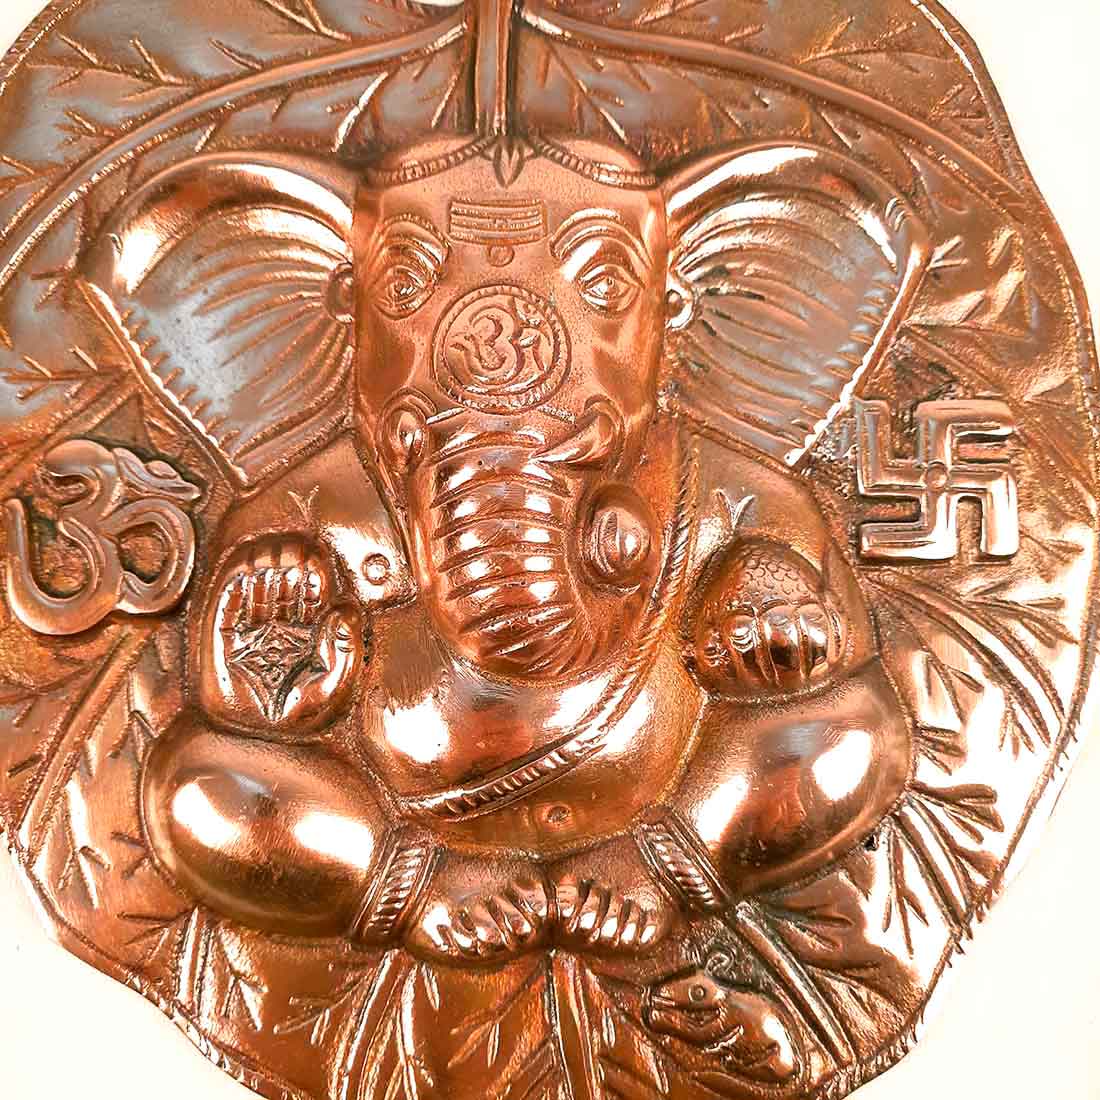 Ganesh Idol Wall Hanging | Lord Ganesha With Leaf Design Wall Statue Decor |Religoius & Spiritual Wall Art - For Puja, Home & Entrance  Living Room & Gift -13 Inch